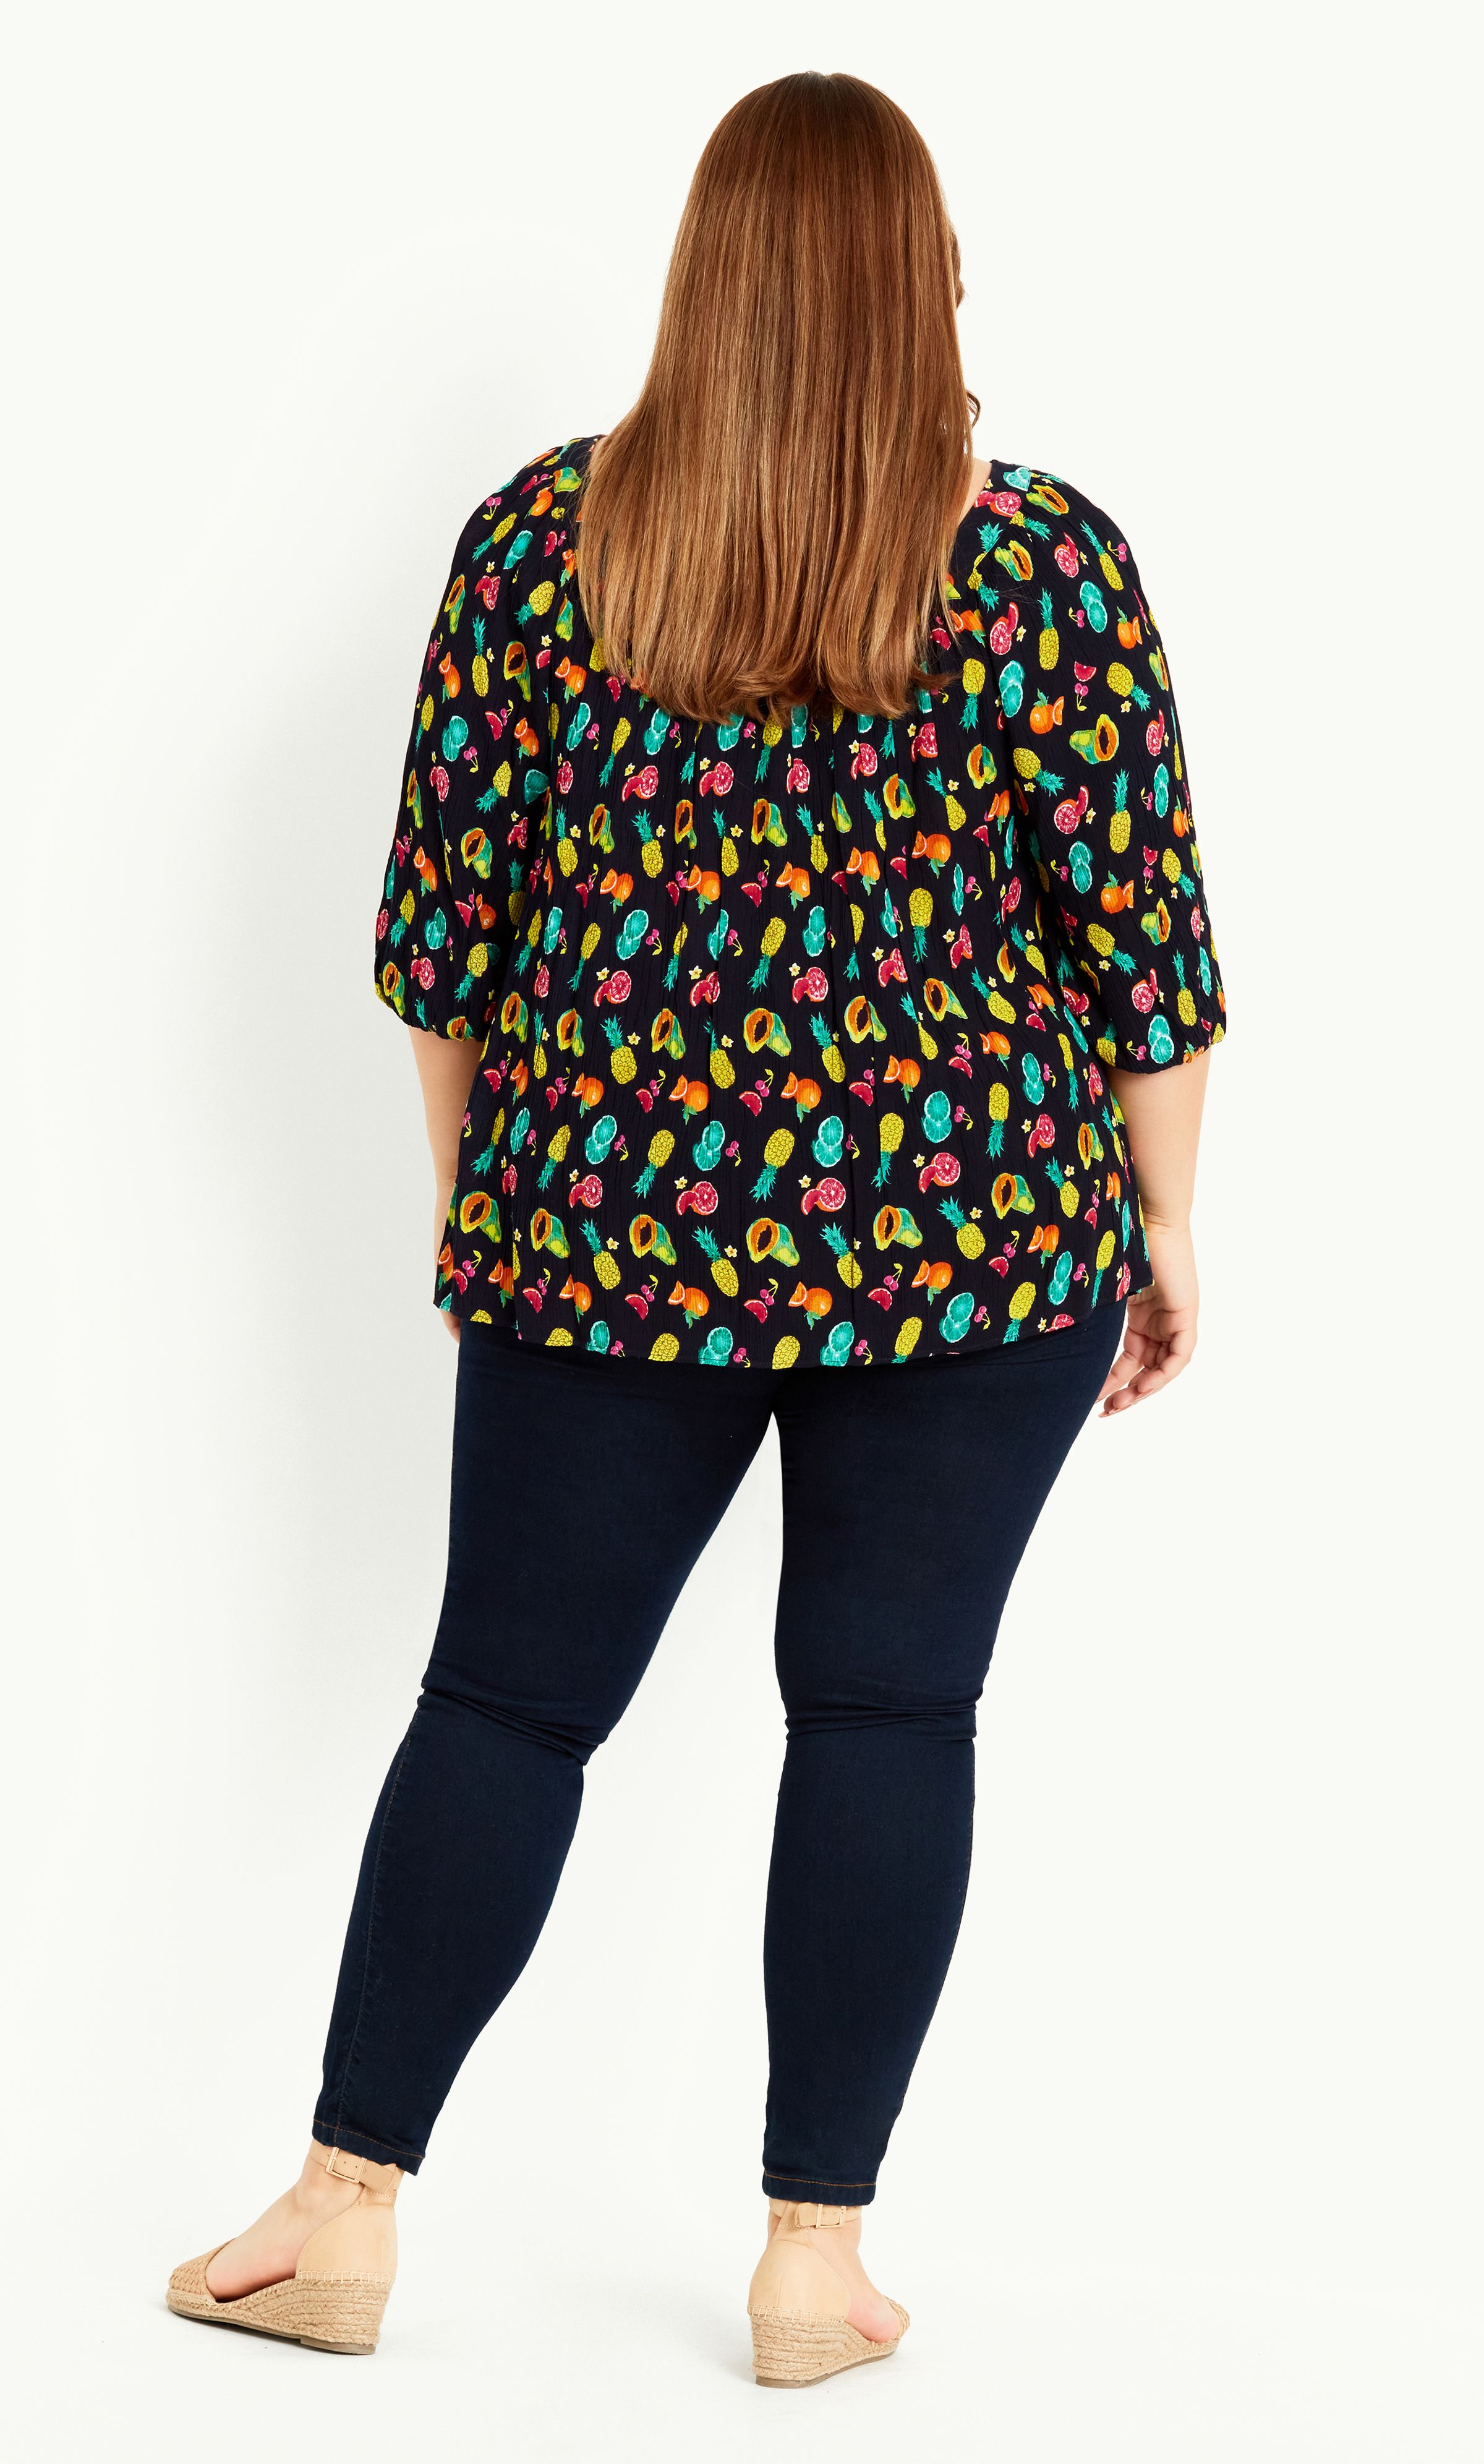 A little bit playful and all kinds of stylish, the Fruit Button Through Top brings a youthful touch to any wardrobe. Featuring a square neckline, lightweight fabrication and fun-loving fruit print for major summer vibes, this breezy blouse ticks all the boxes! Key Features Include: - Square neckline - 3/4 sleeves - Textured non-stretch fabrication - Relaxed fit - Pull over style - Unlined - Hip length Team with skinny jeans, espadrilles and a bold lip for an upstyled Saturday outfit.